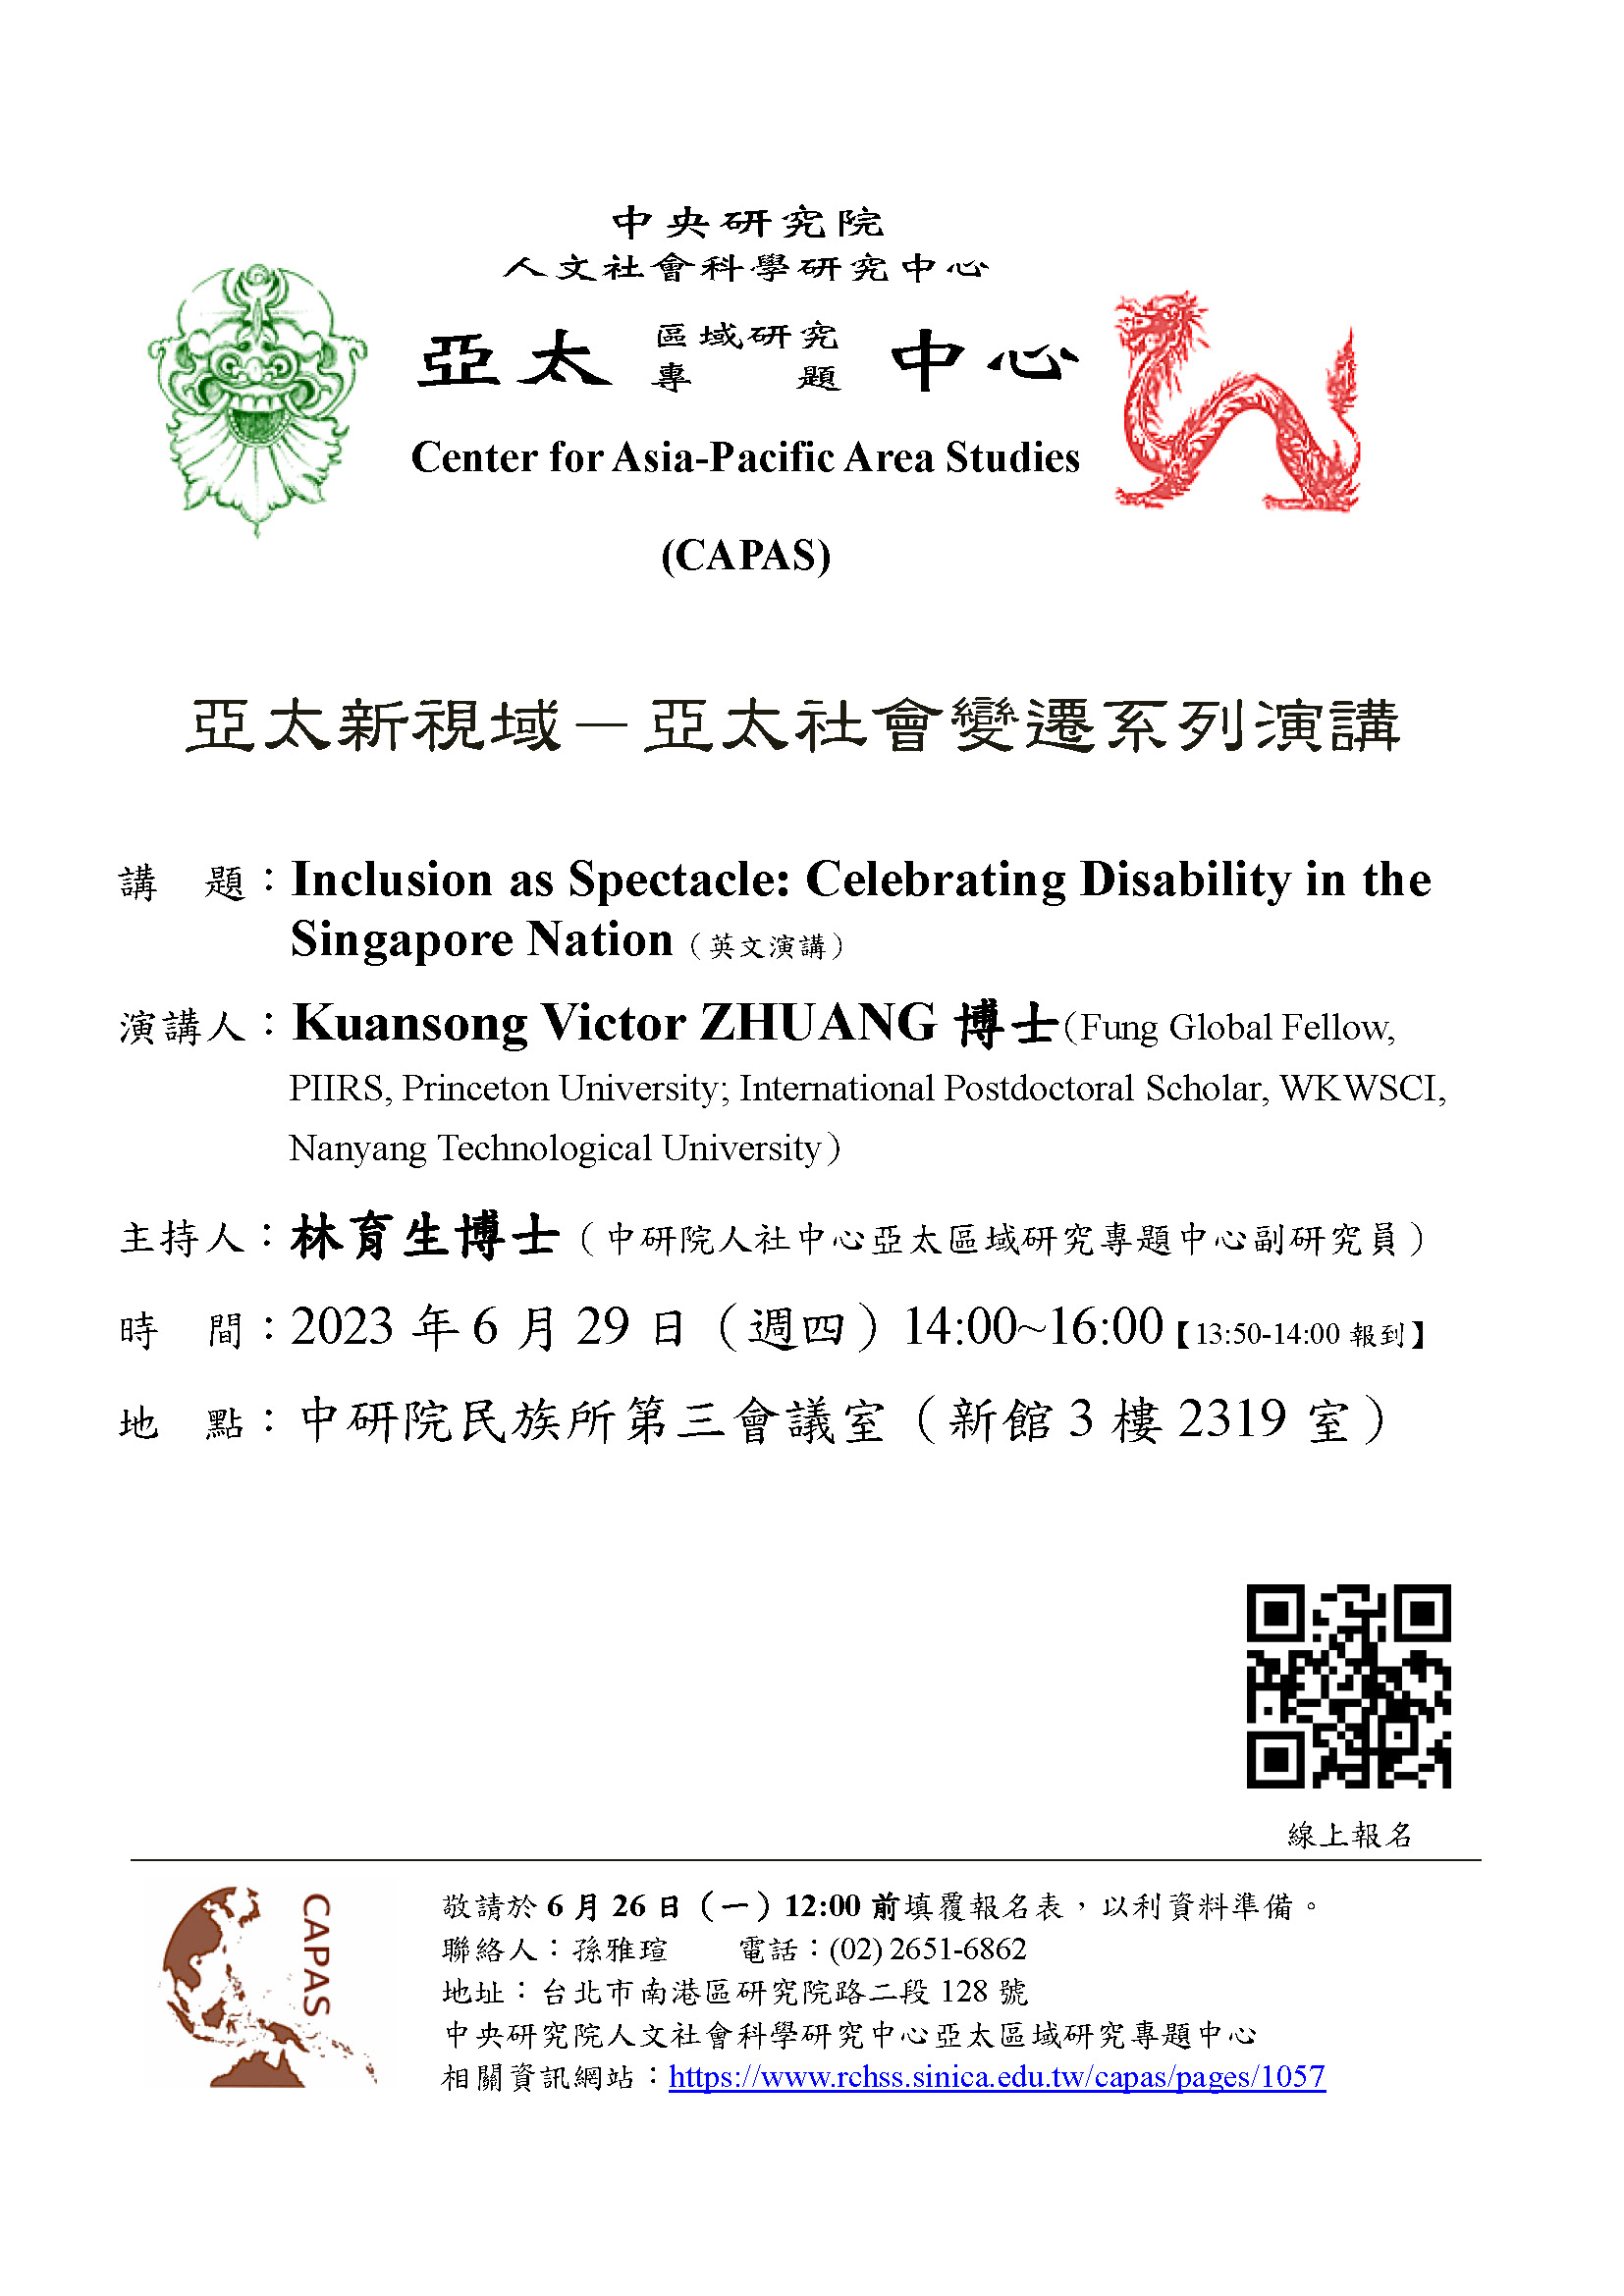 Lecture: “Inclusion as Spectacle: Celebrating Disability in the Singapore Nation”